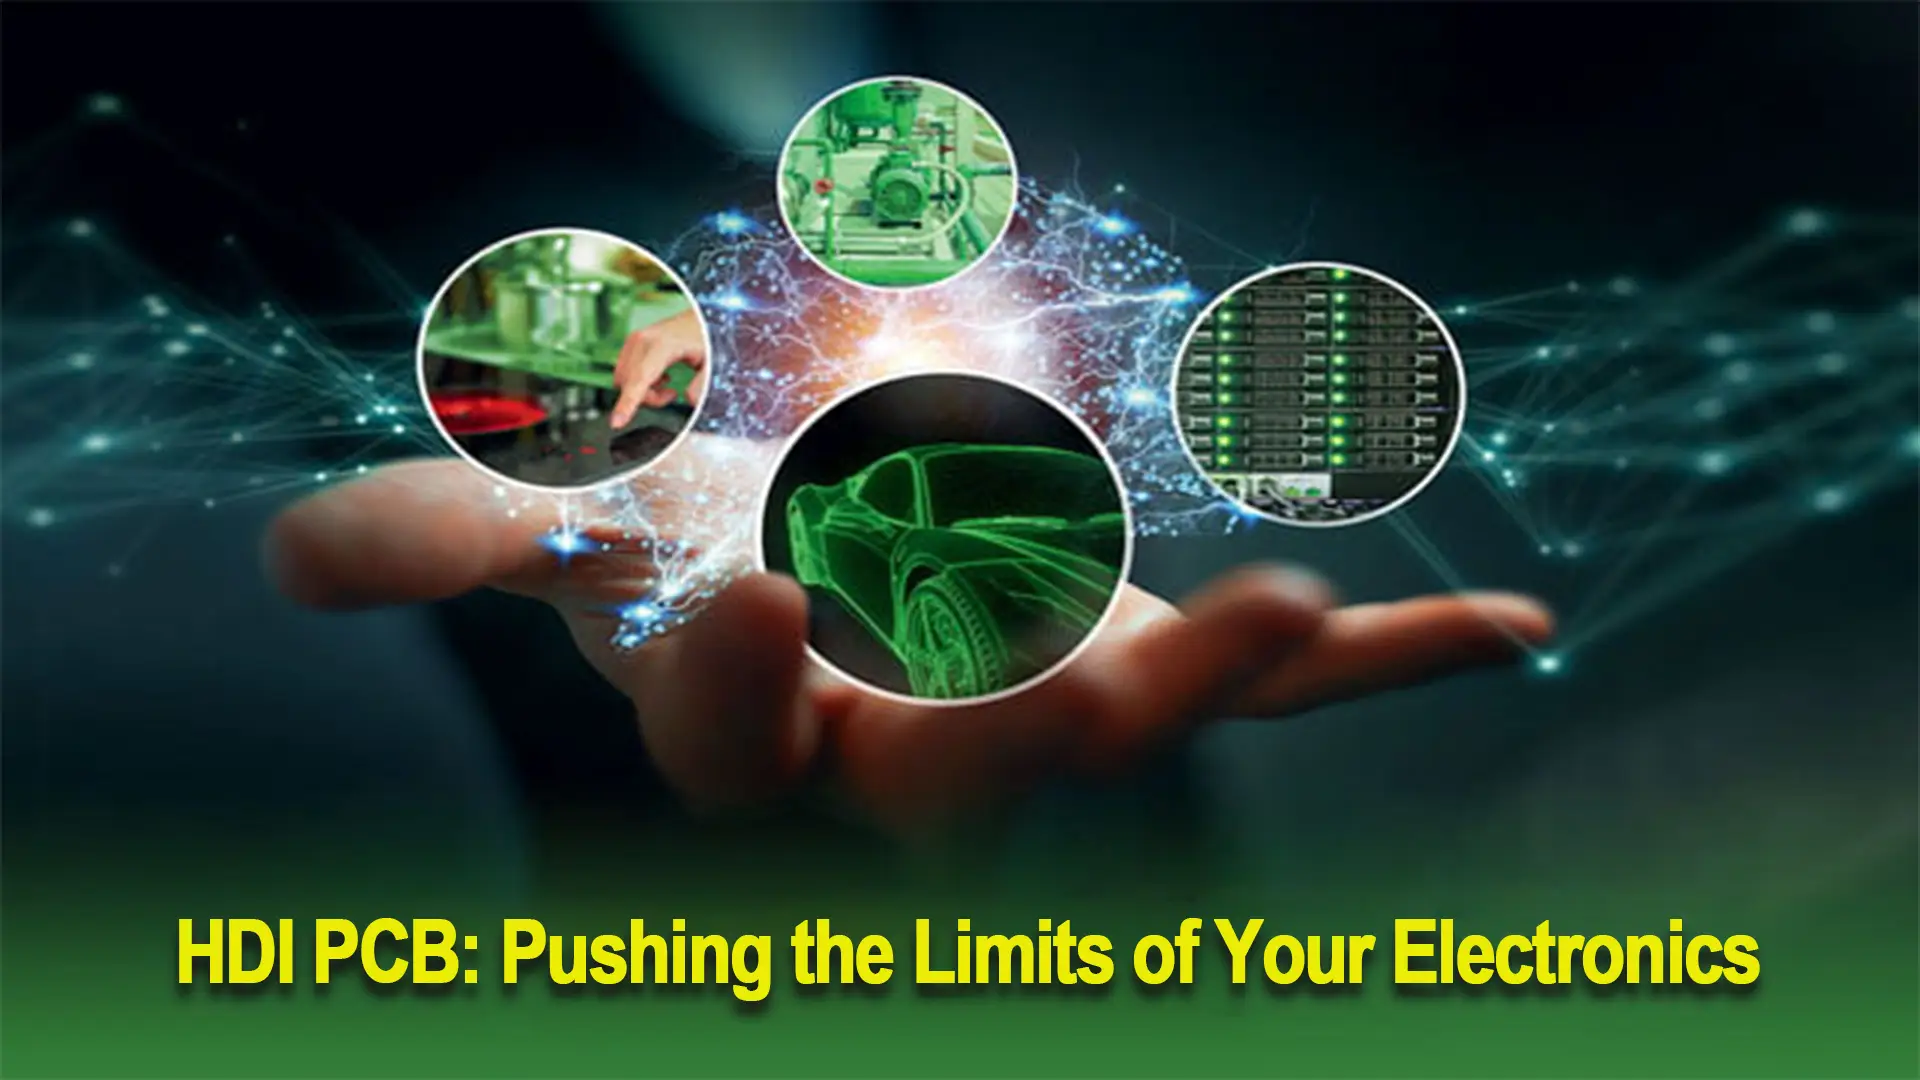 HDI PCB: Pushing the Limits of Your Electronics